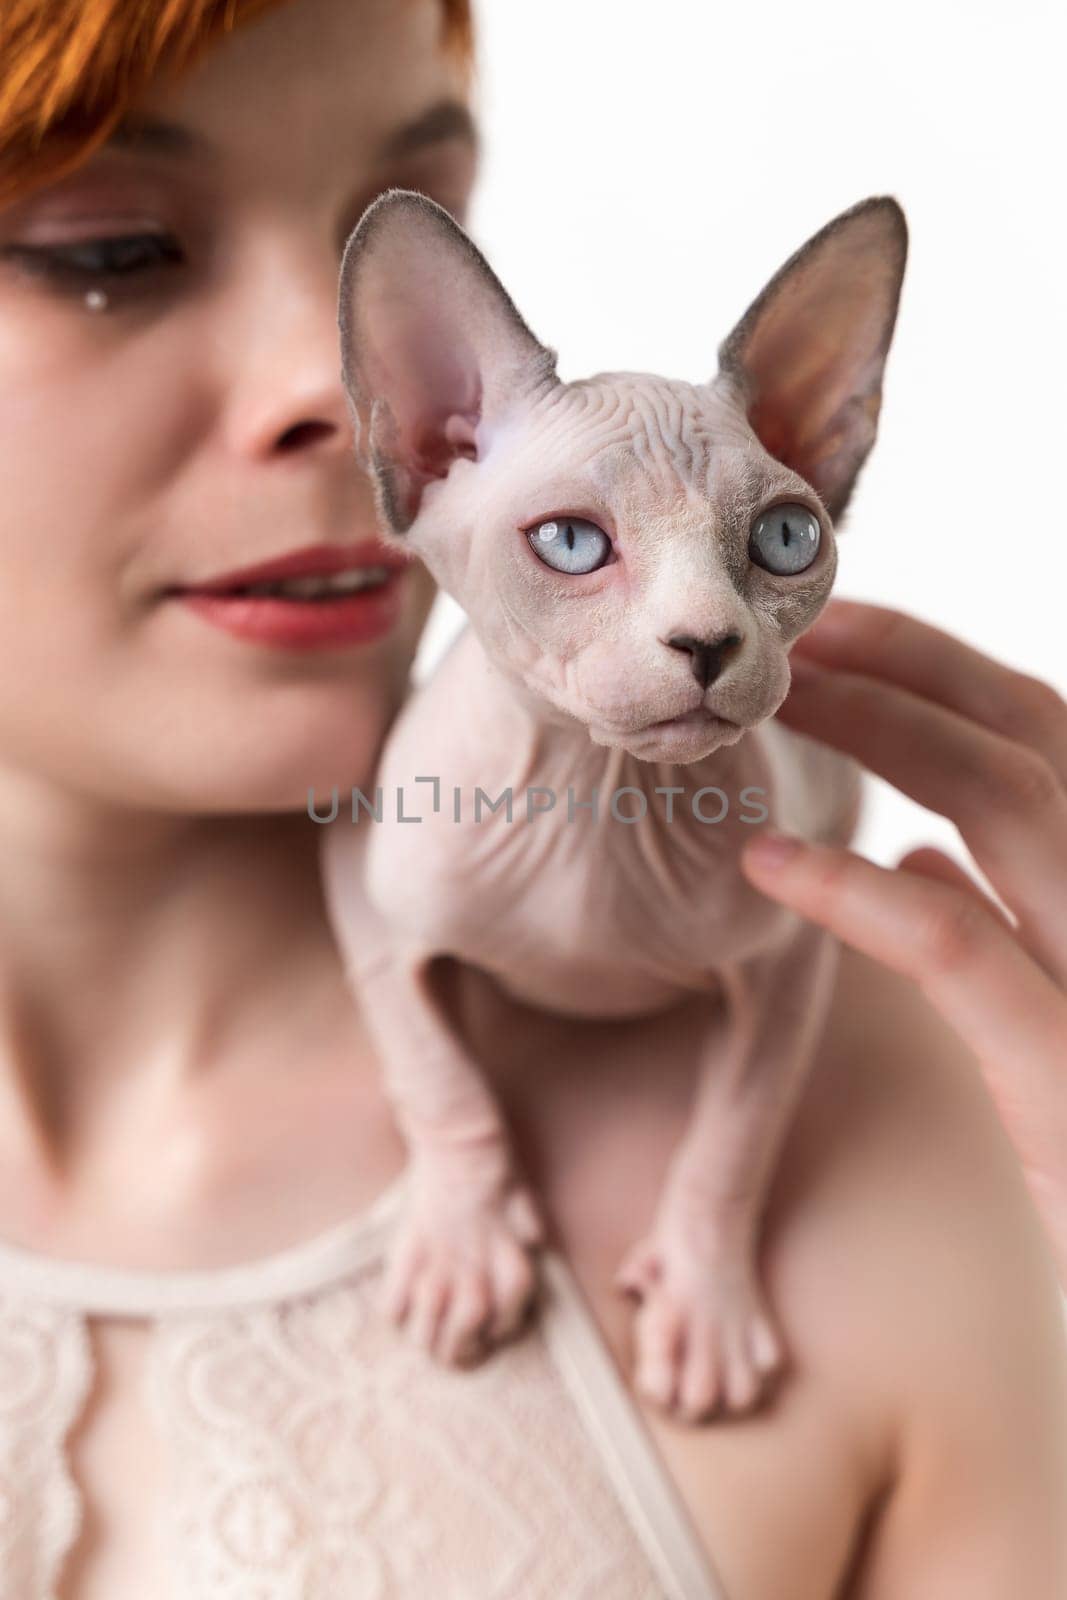 Sphynx Hairless kitten blue mink and white color sitting on shoulder of young woman. Close-up, studio shot on white background. Selective focus on foreground, shallow depth of field. Part of series.